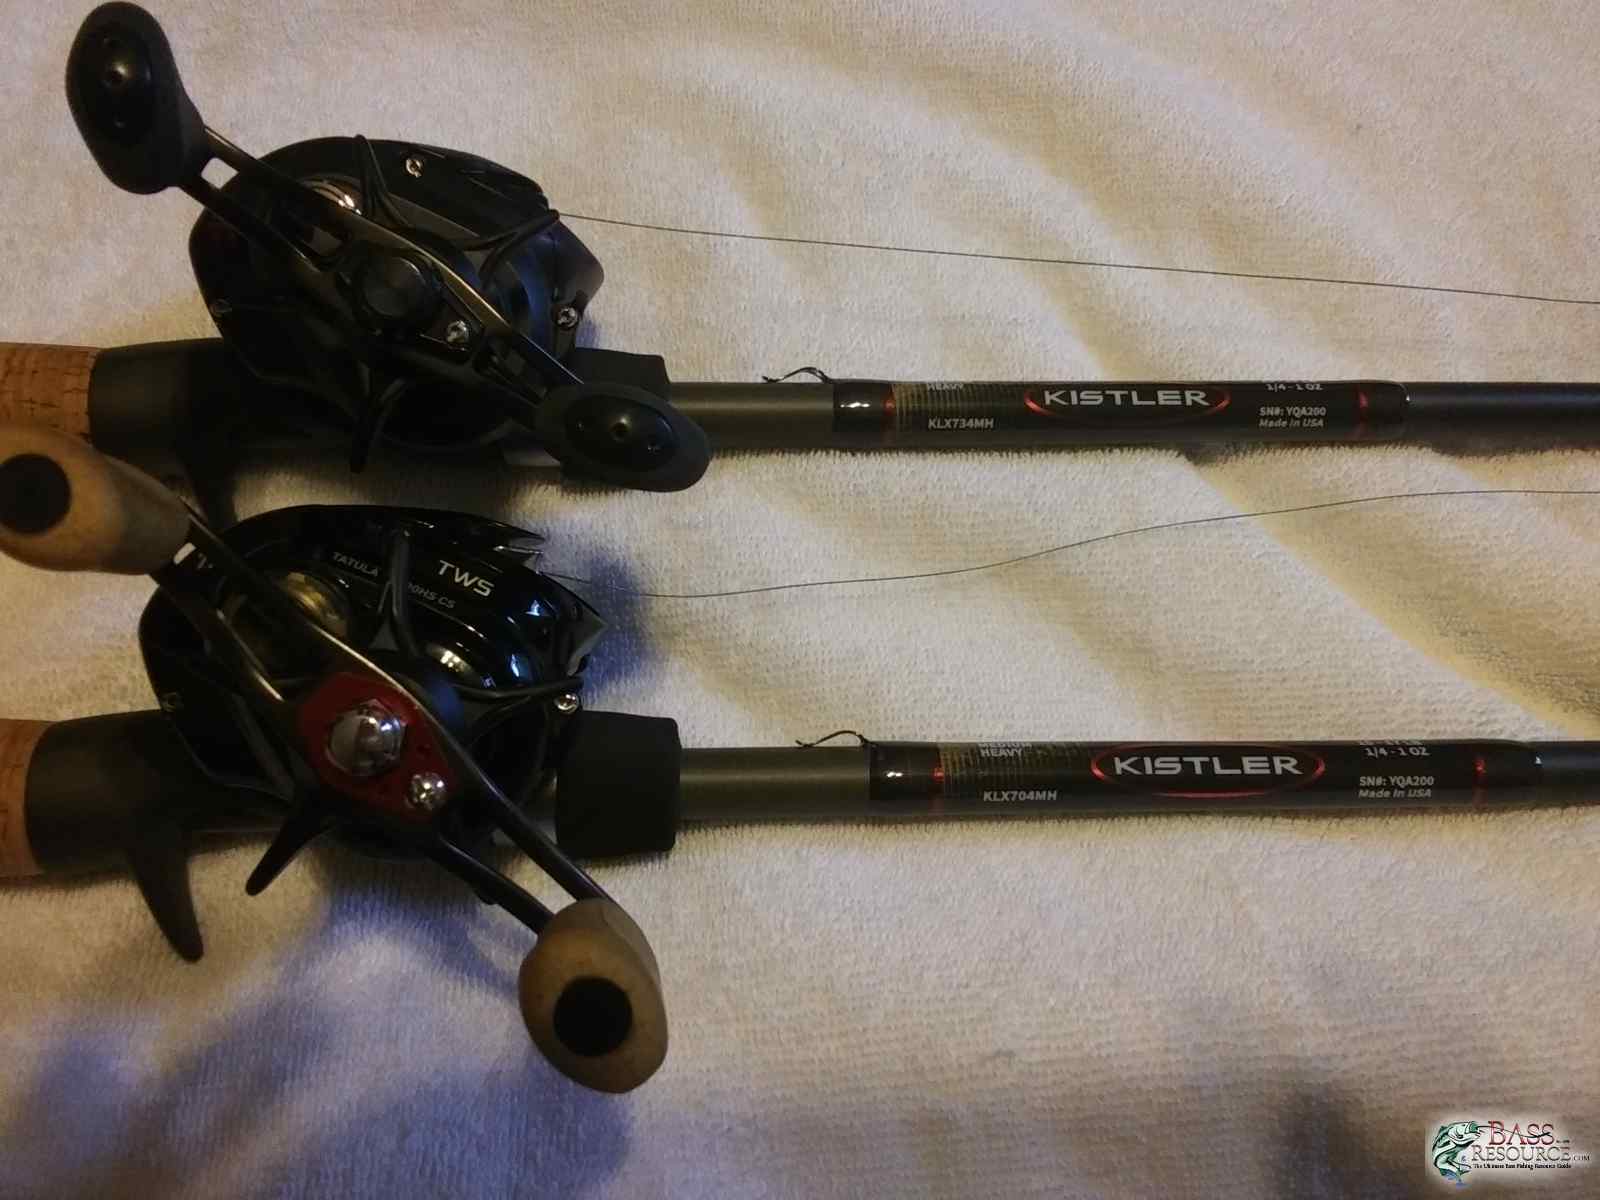 Kistler frog rod - Fishing Rods, Reels, Line, and Knots - Bass Fishing  Forums